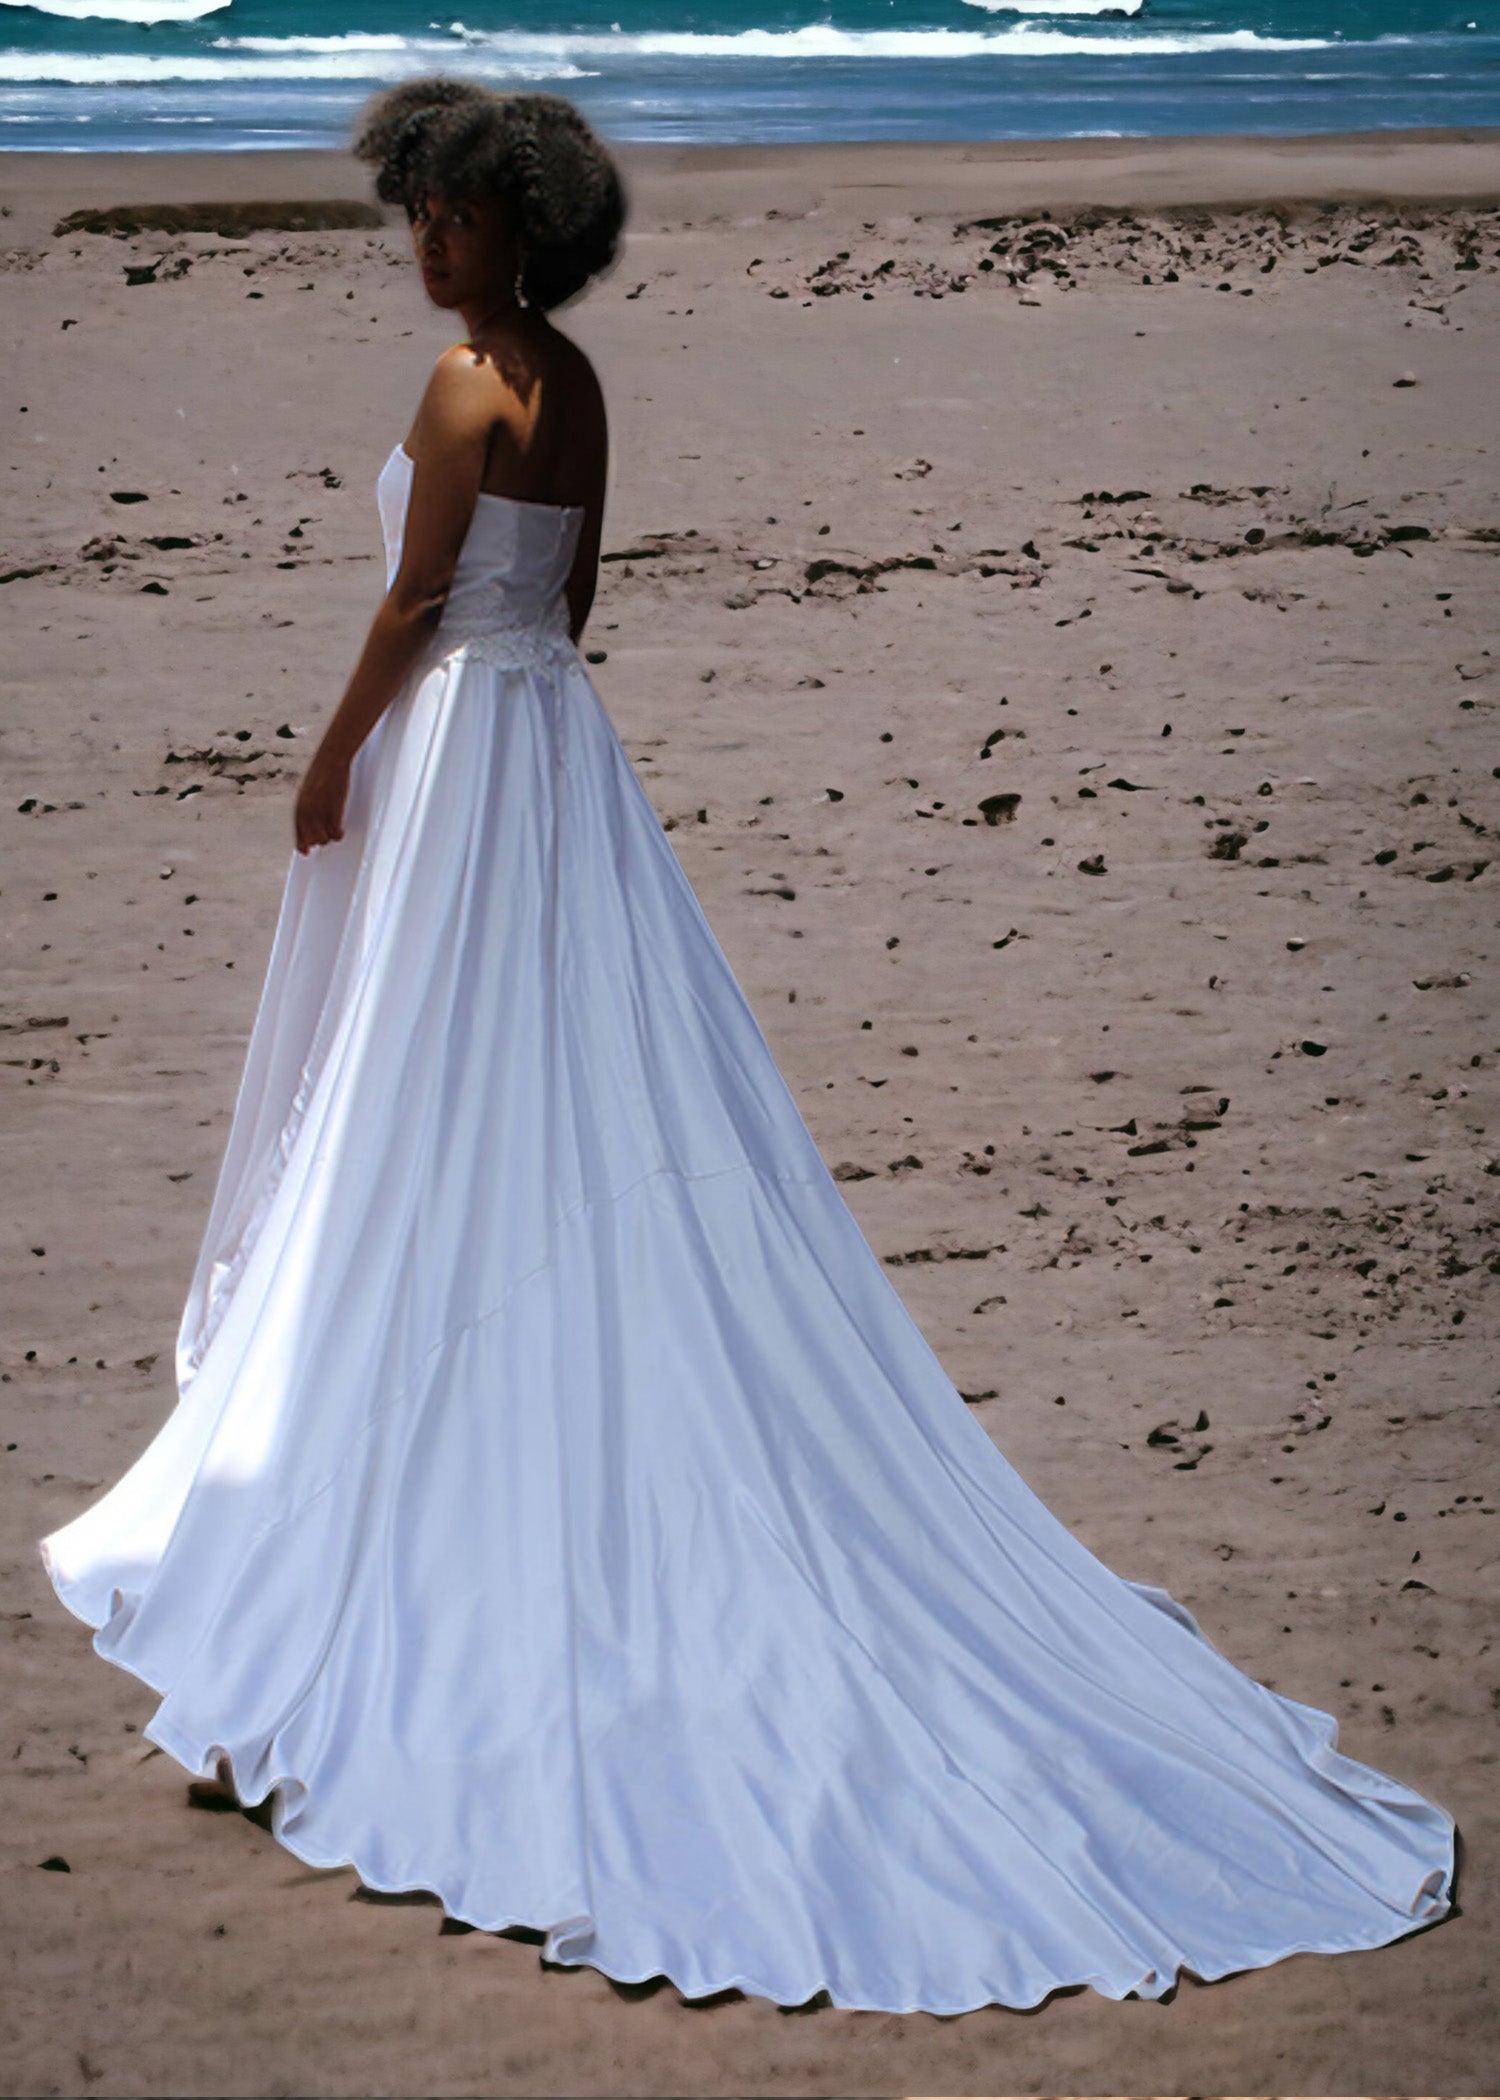 The Summer Strapless Bridal Gown